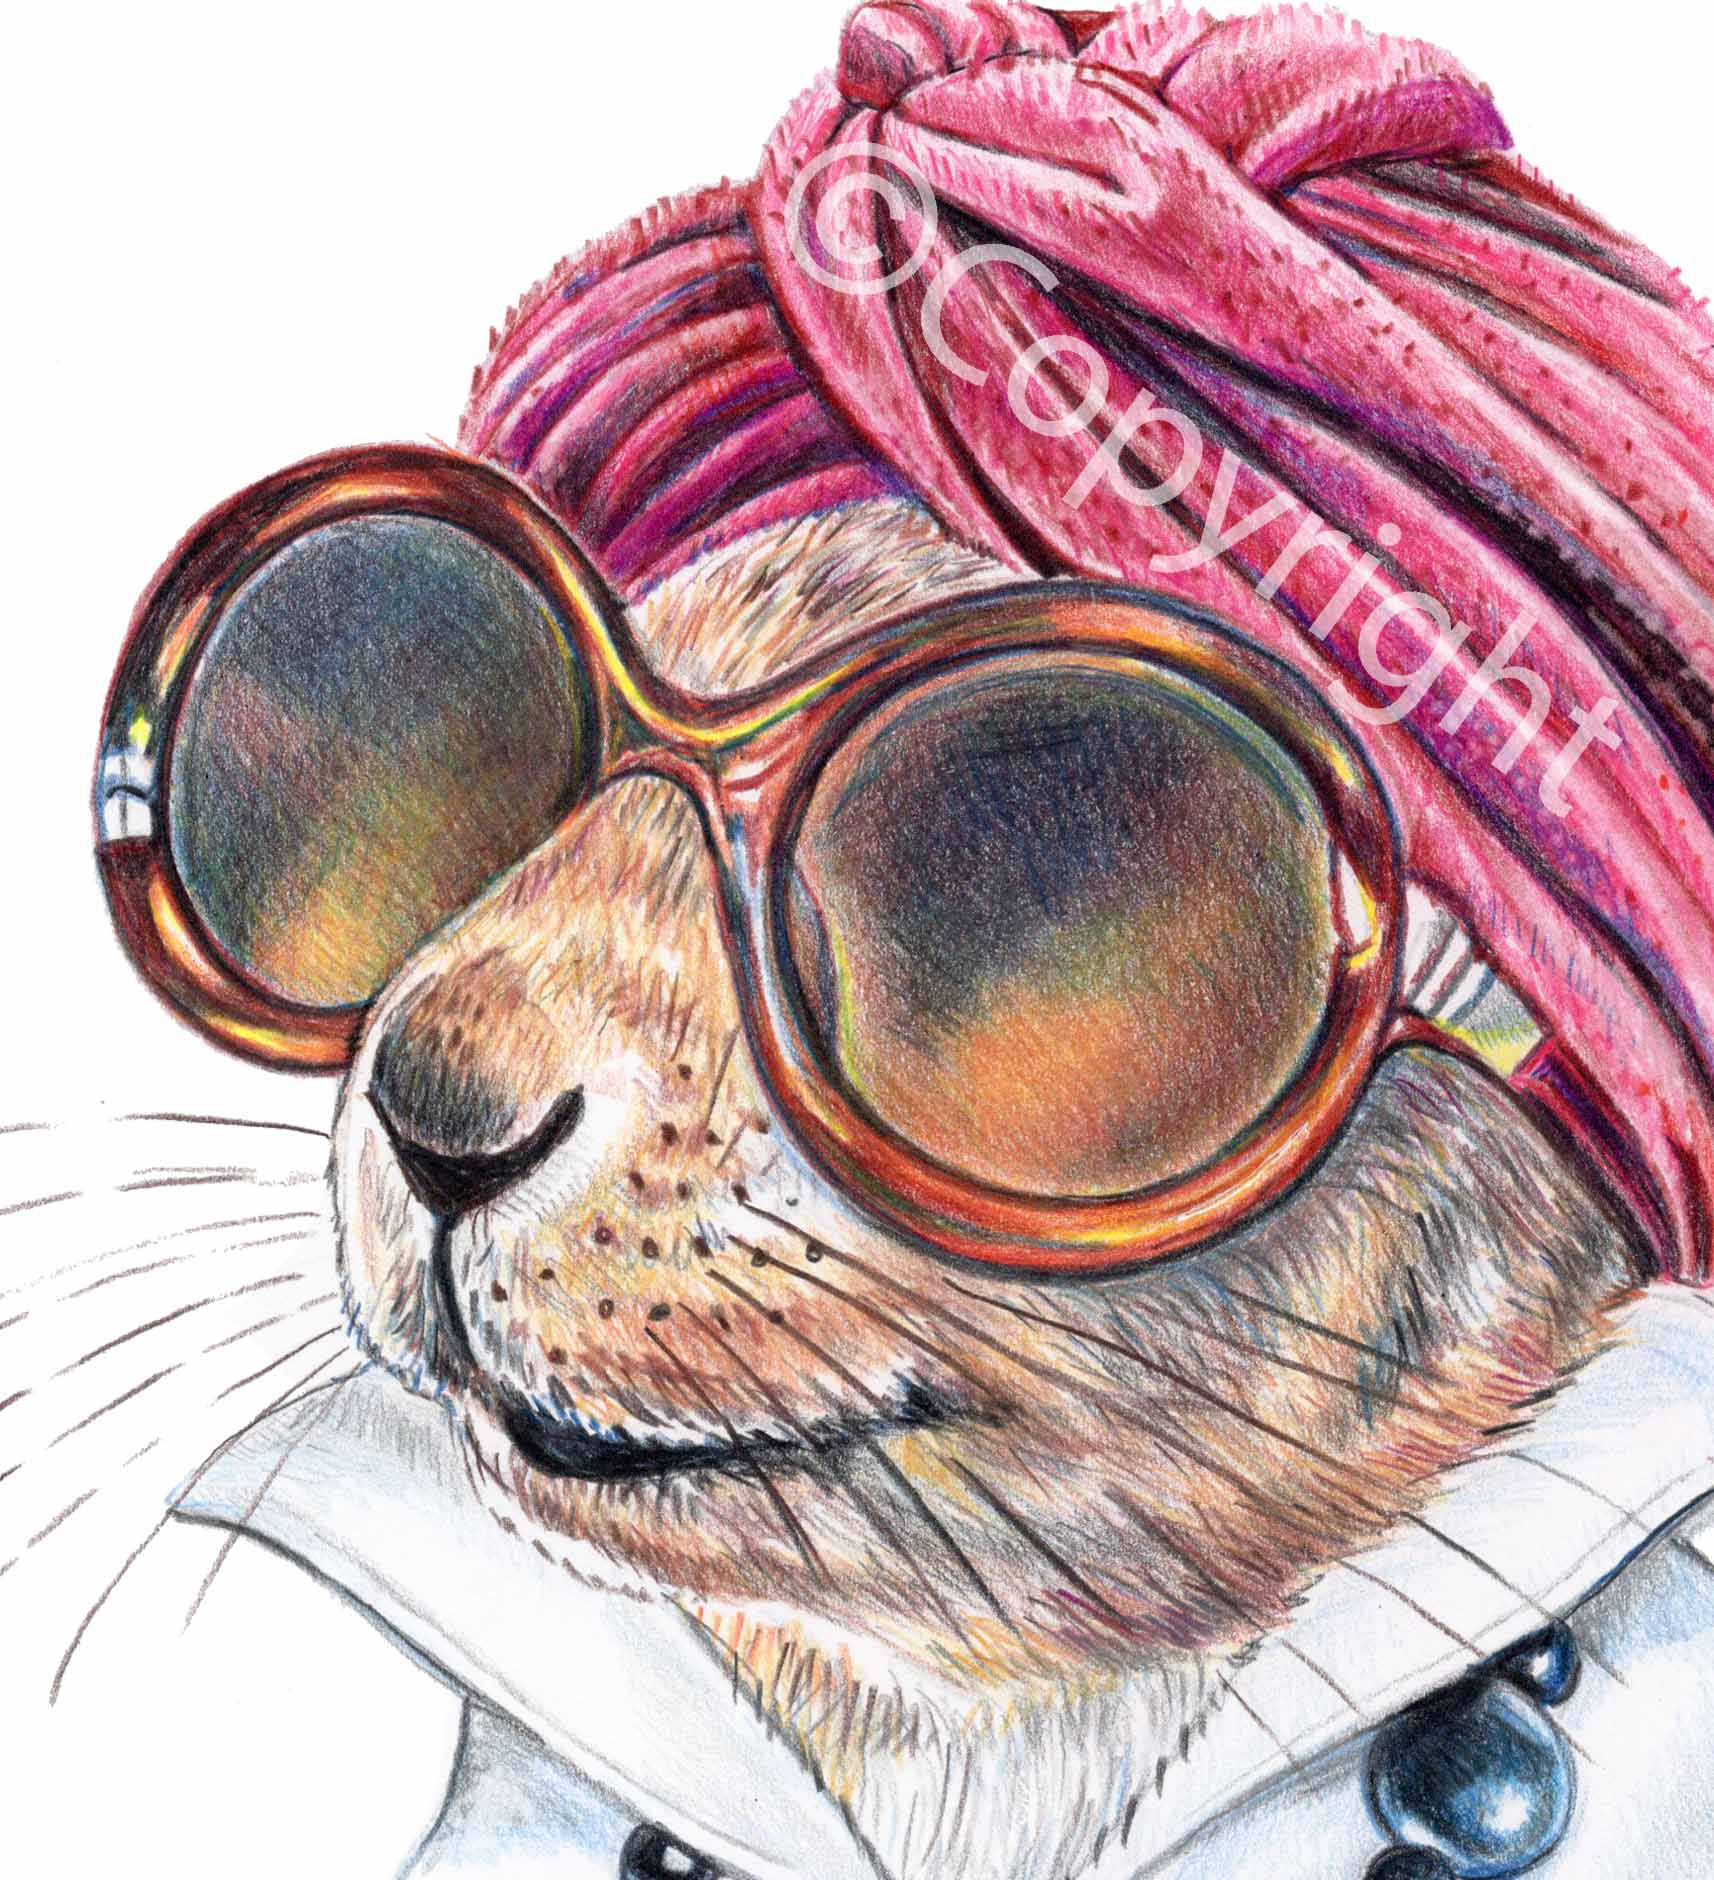 Coloured pencil drawing of a squirrel wearing vintage sunglass, turban and necklace. She's a diva! Art by Deidre Wicks